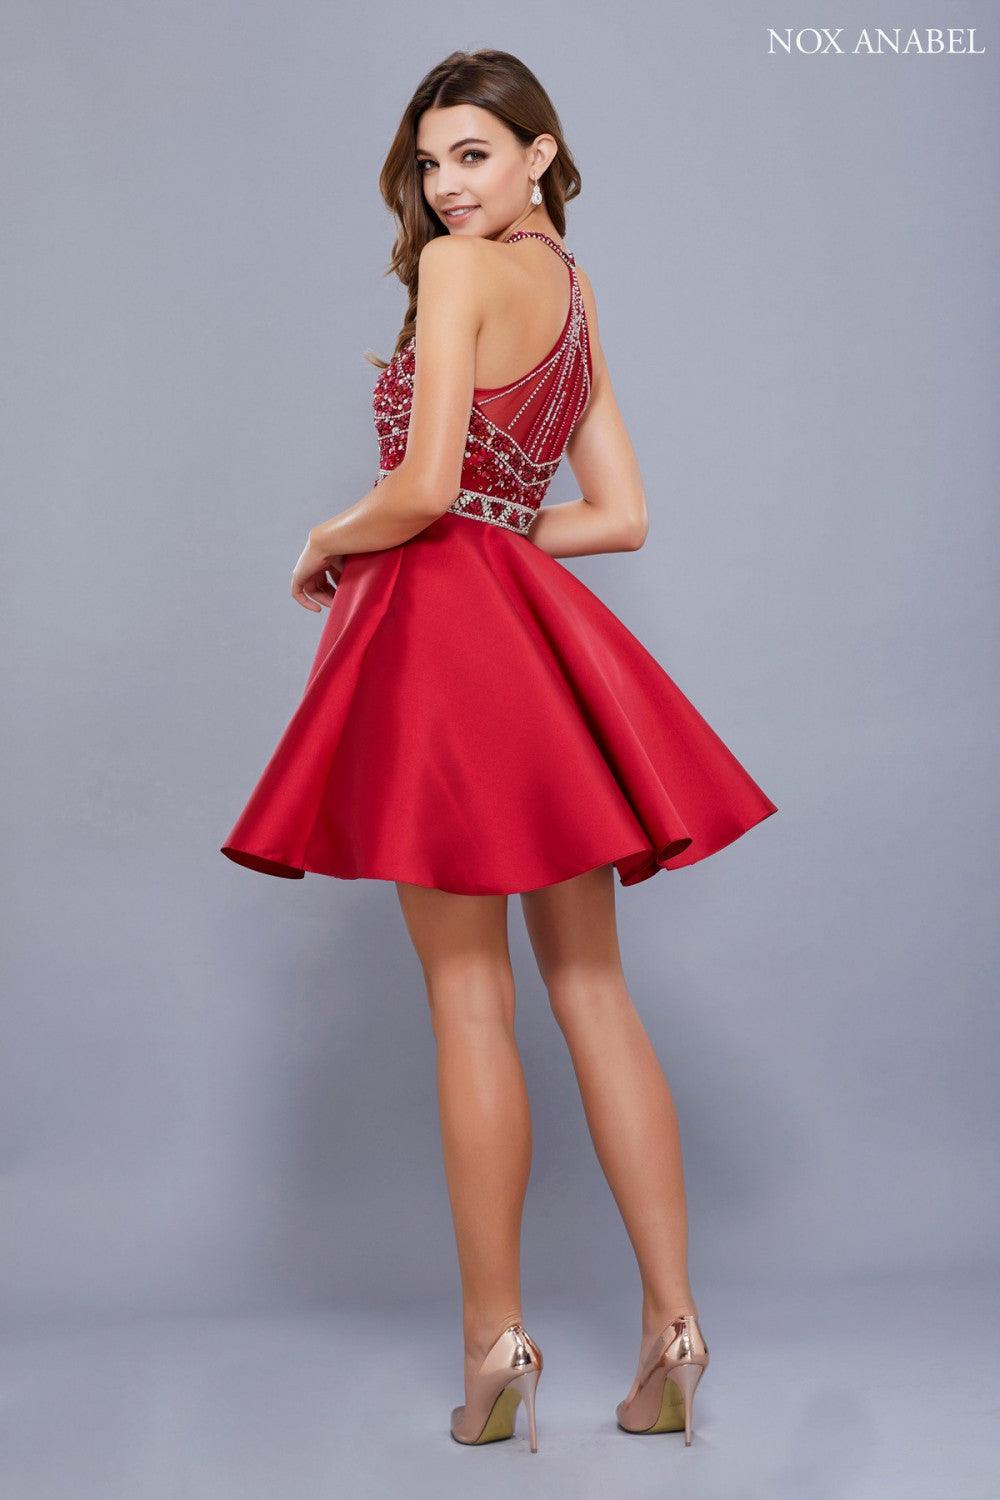 Short Sexy Prom Homecoming Dress - The Dress Outlet Nox Anabel